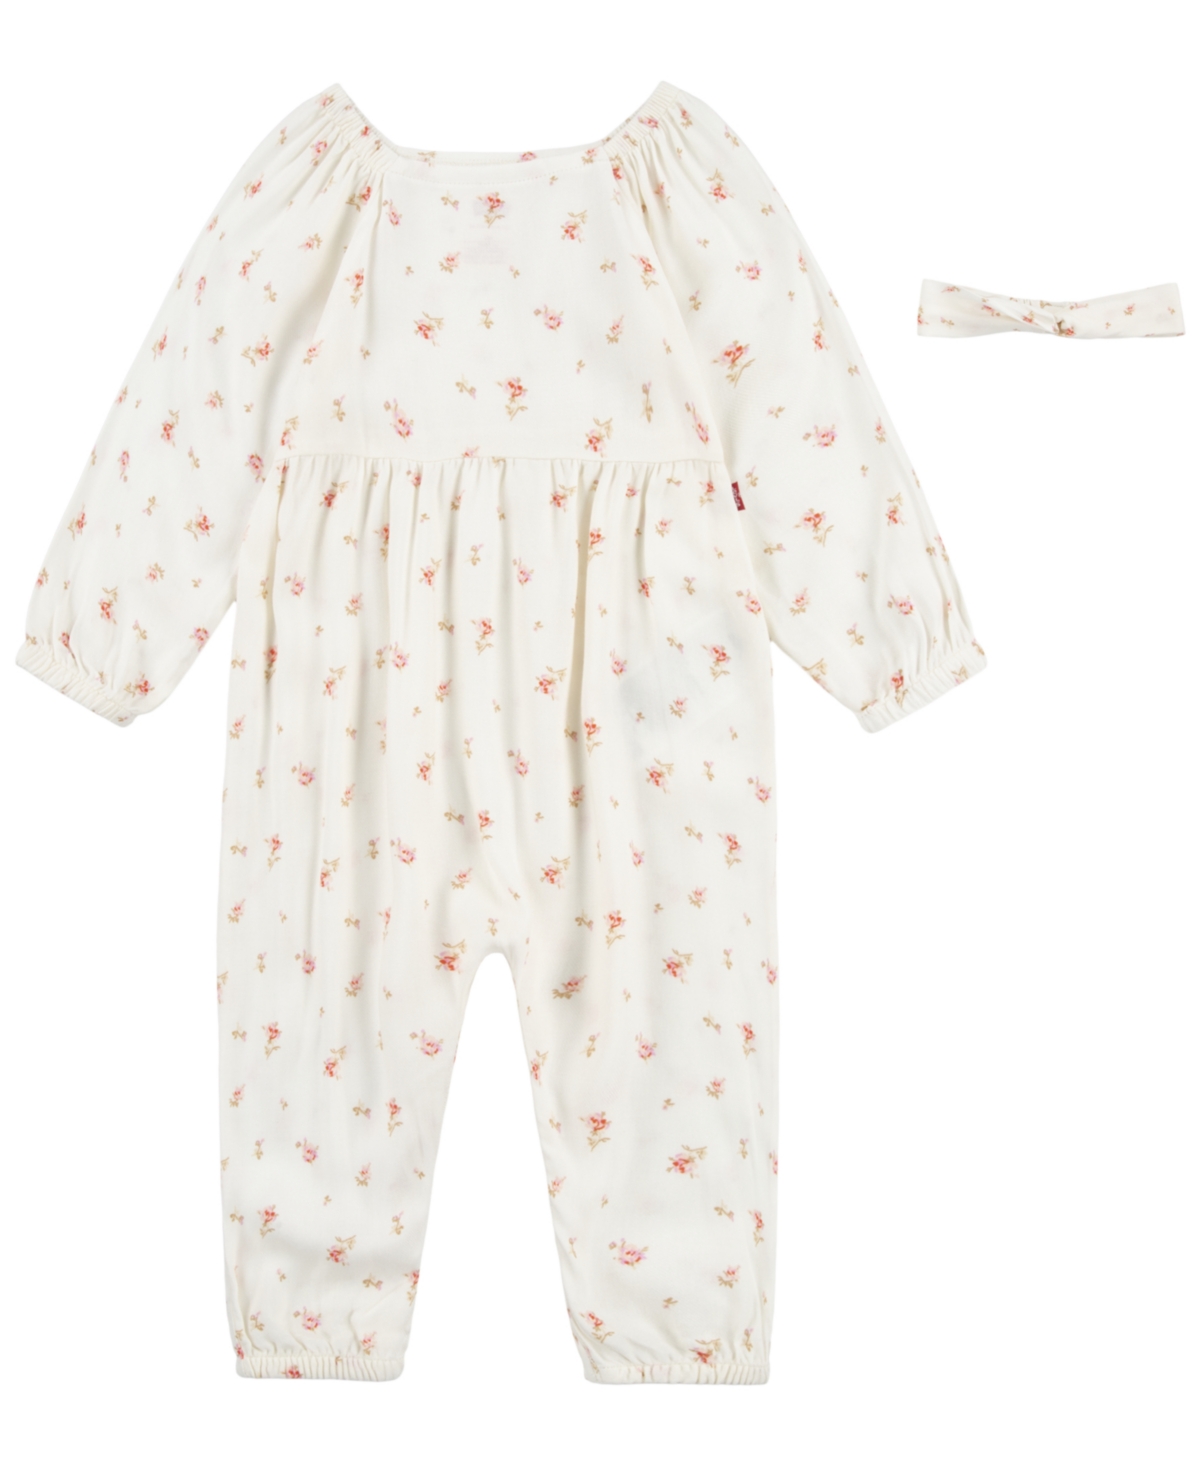 Levi's Baby Girls Long Sleeve Floral Jumpsuit And Headband, 2 Piece Set In Antique White